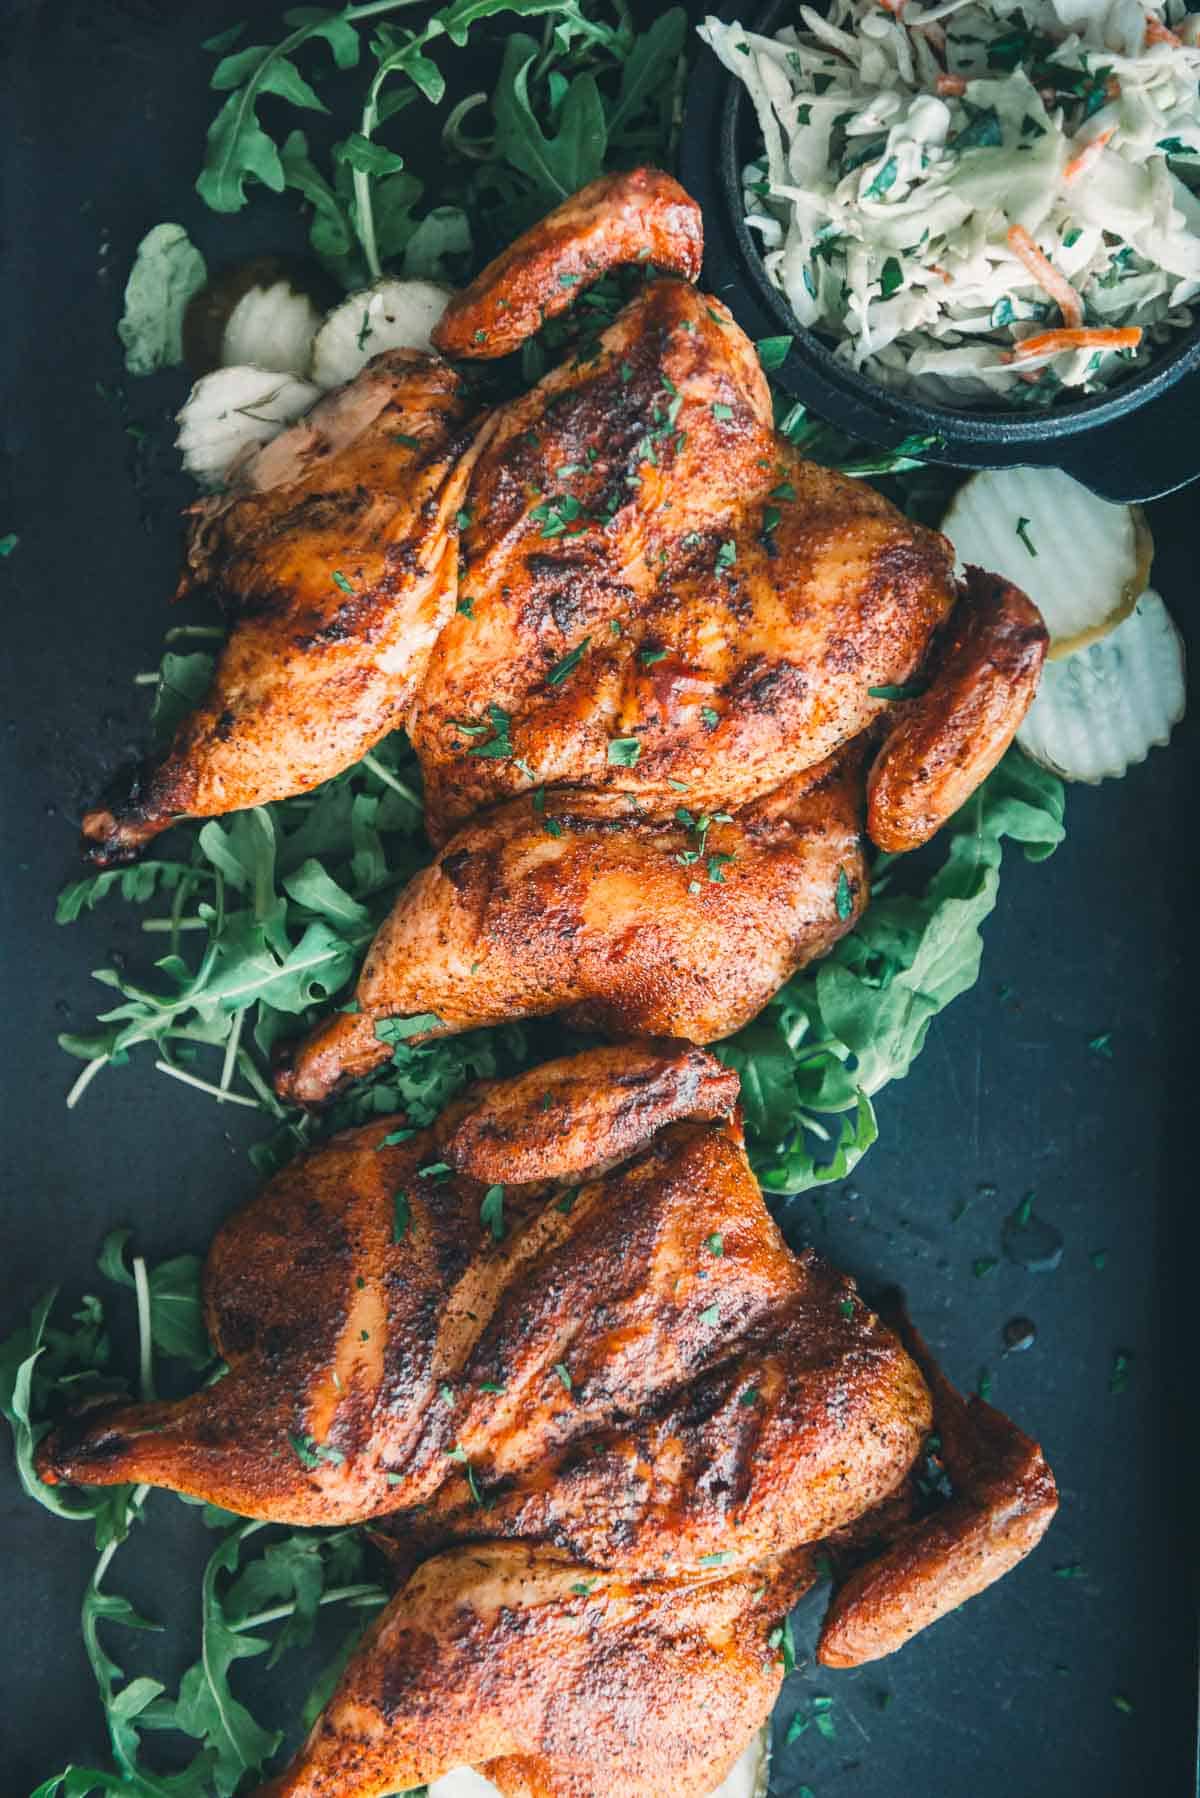 Smoked cornish hens with coleslaw on a baking sheet.